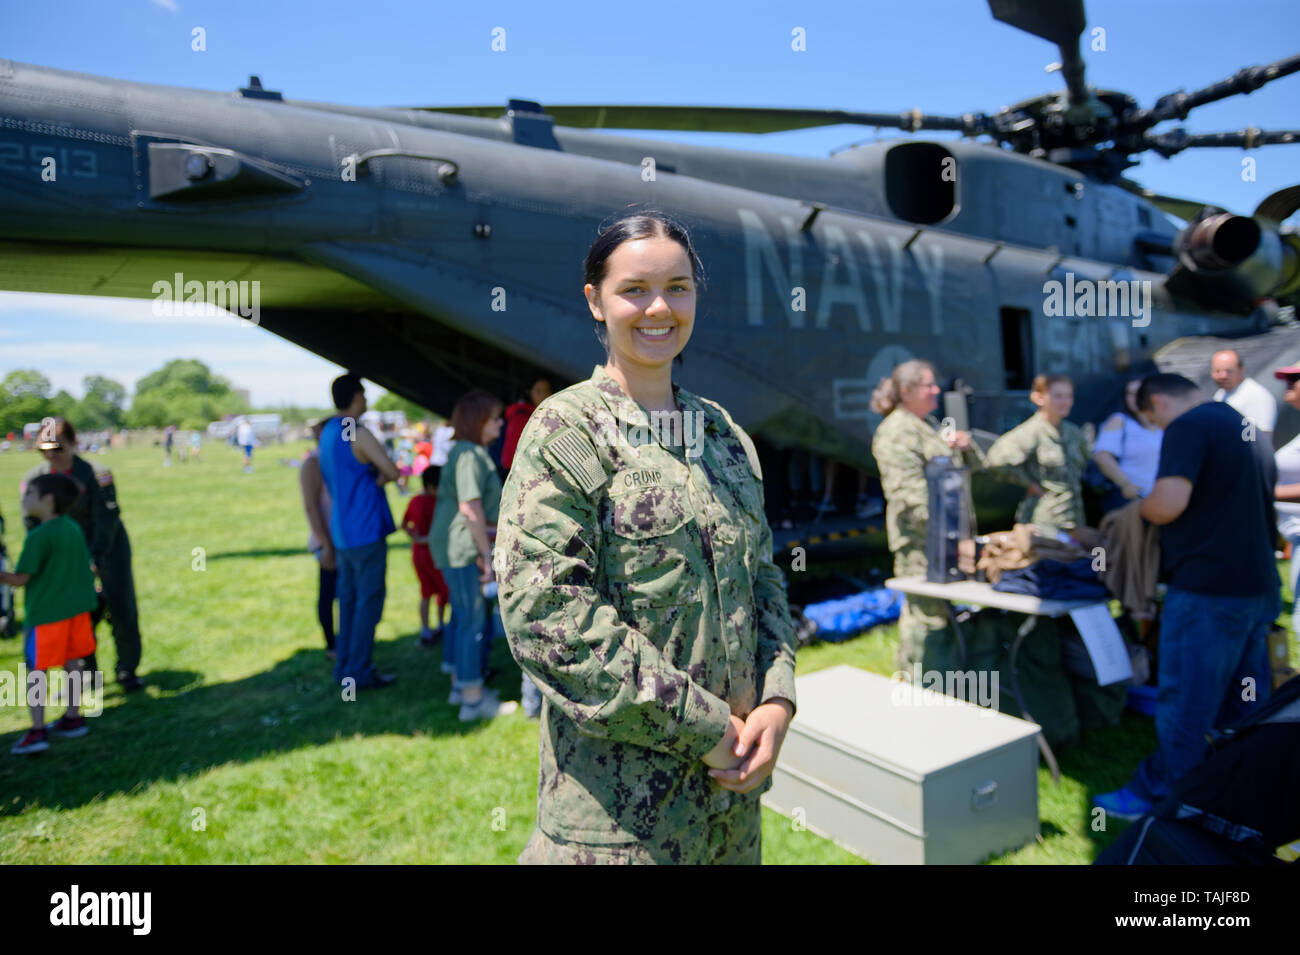 May 25, 2019 - East Meadow, New York, United States - Aviation Electricians Mate Airman (AE) CRUMP poses in front of a U.S. Navy MH53-E helicopter at the Navy hosted aviation event, as part of Fleet Week, on Memorial Day Weekend at Eisenhower Park on Long Island. Helicopter Mine Countermeasures Squadron 14 has a Korea deployment mine sweeping.  It's the largest helicopter in the Navy, and also carries heavy loads and transports and picks up things for the Navy. (Credit Image: © Ann Parry/ZUMA Wire) Stock Photo